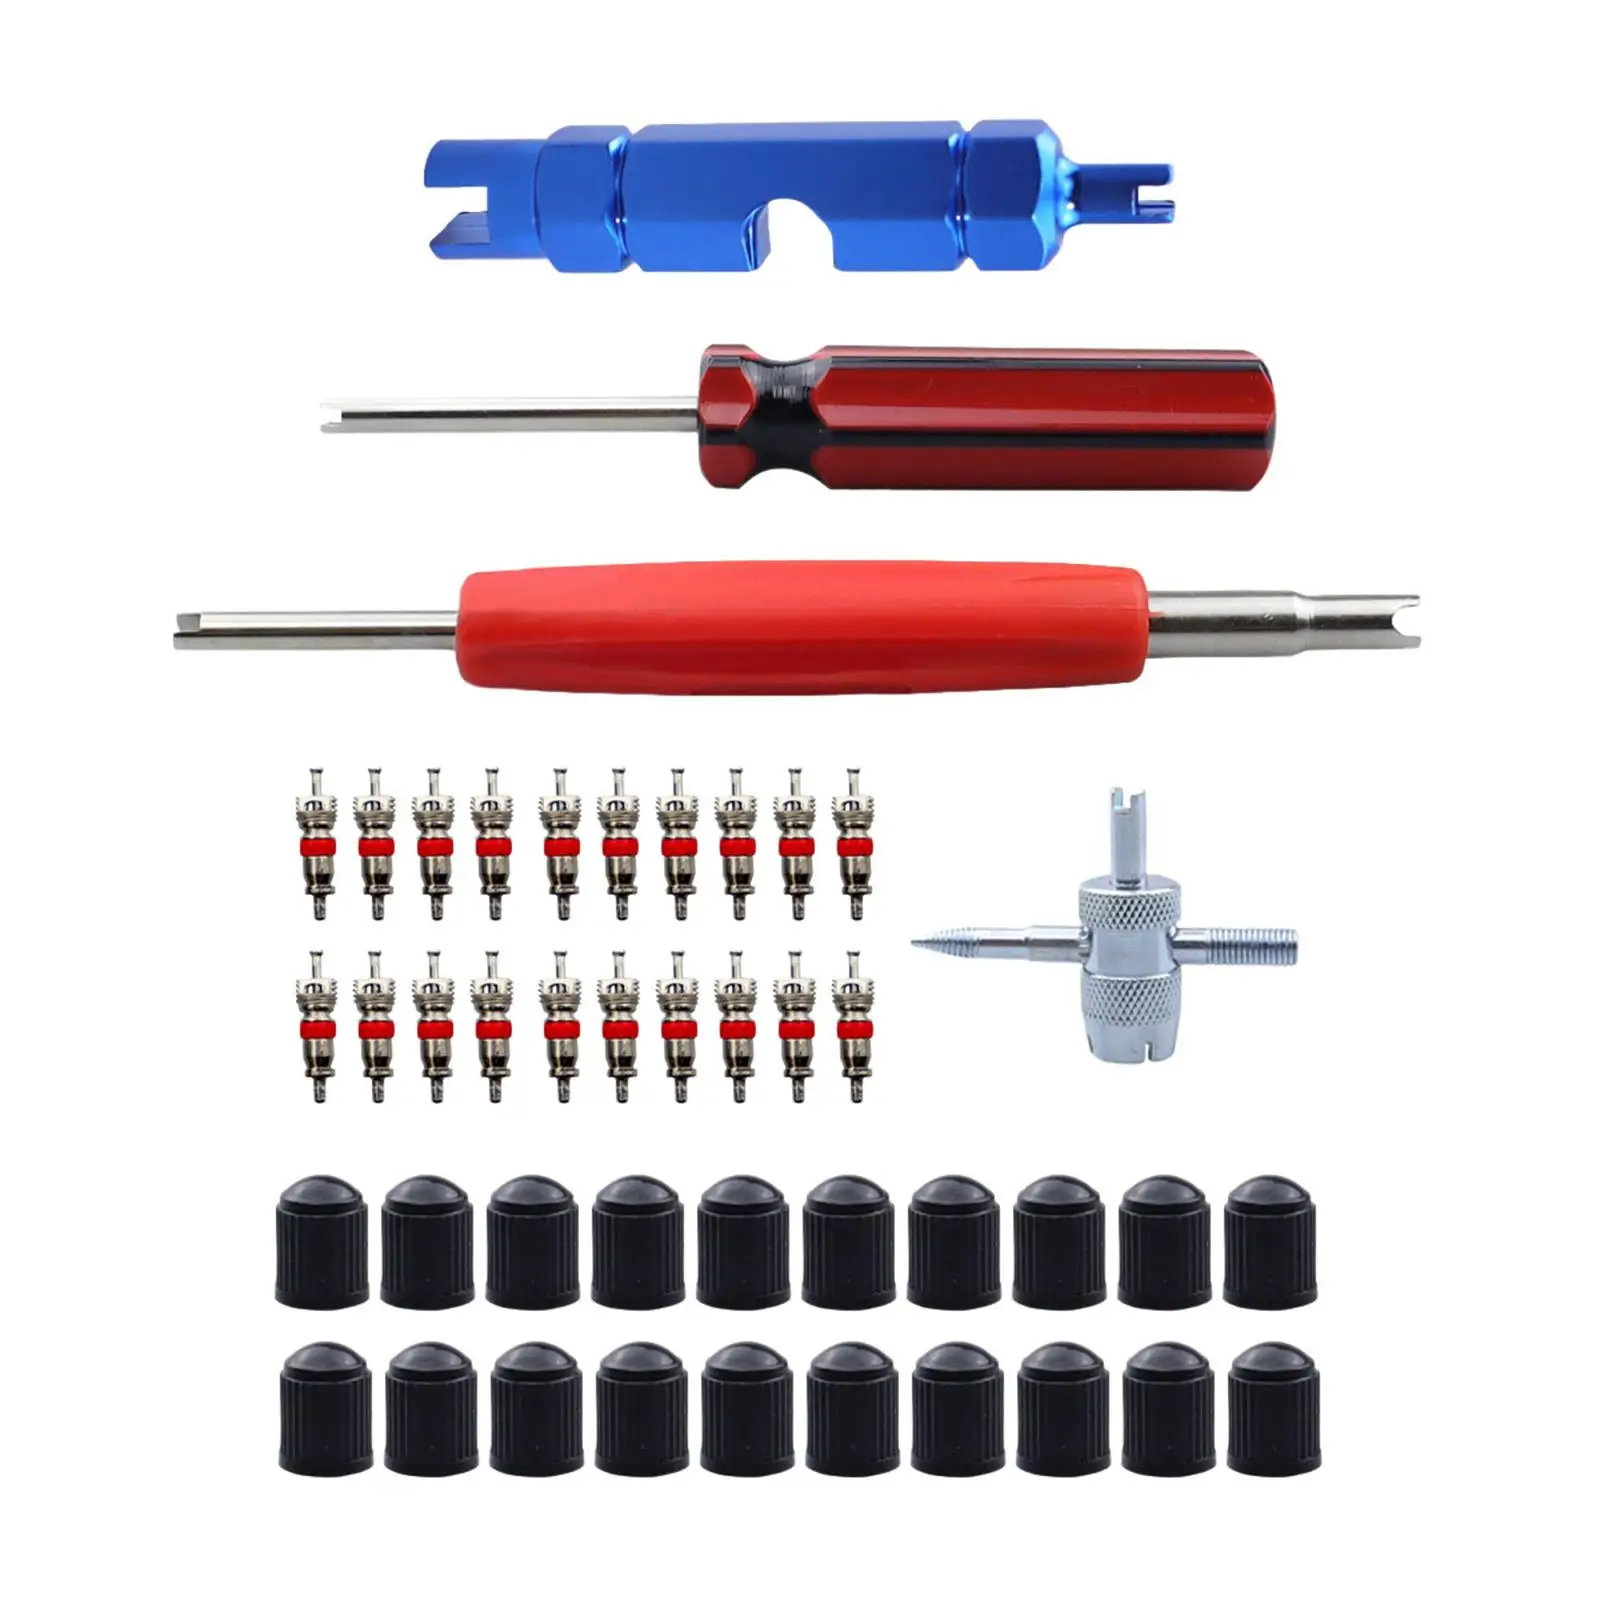 Valve Stem Removal Tool Valve Core Wrench Car Accessories Valve Stem Caps Tyre Valve Repair for Bicycle Auto Truck Bike Car